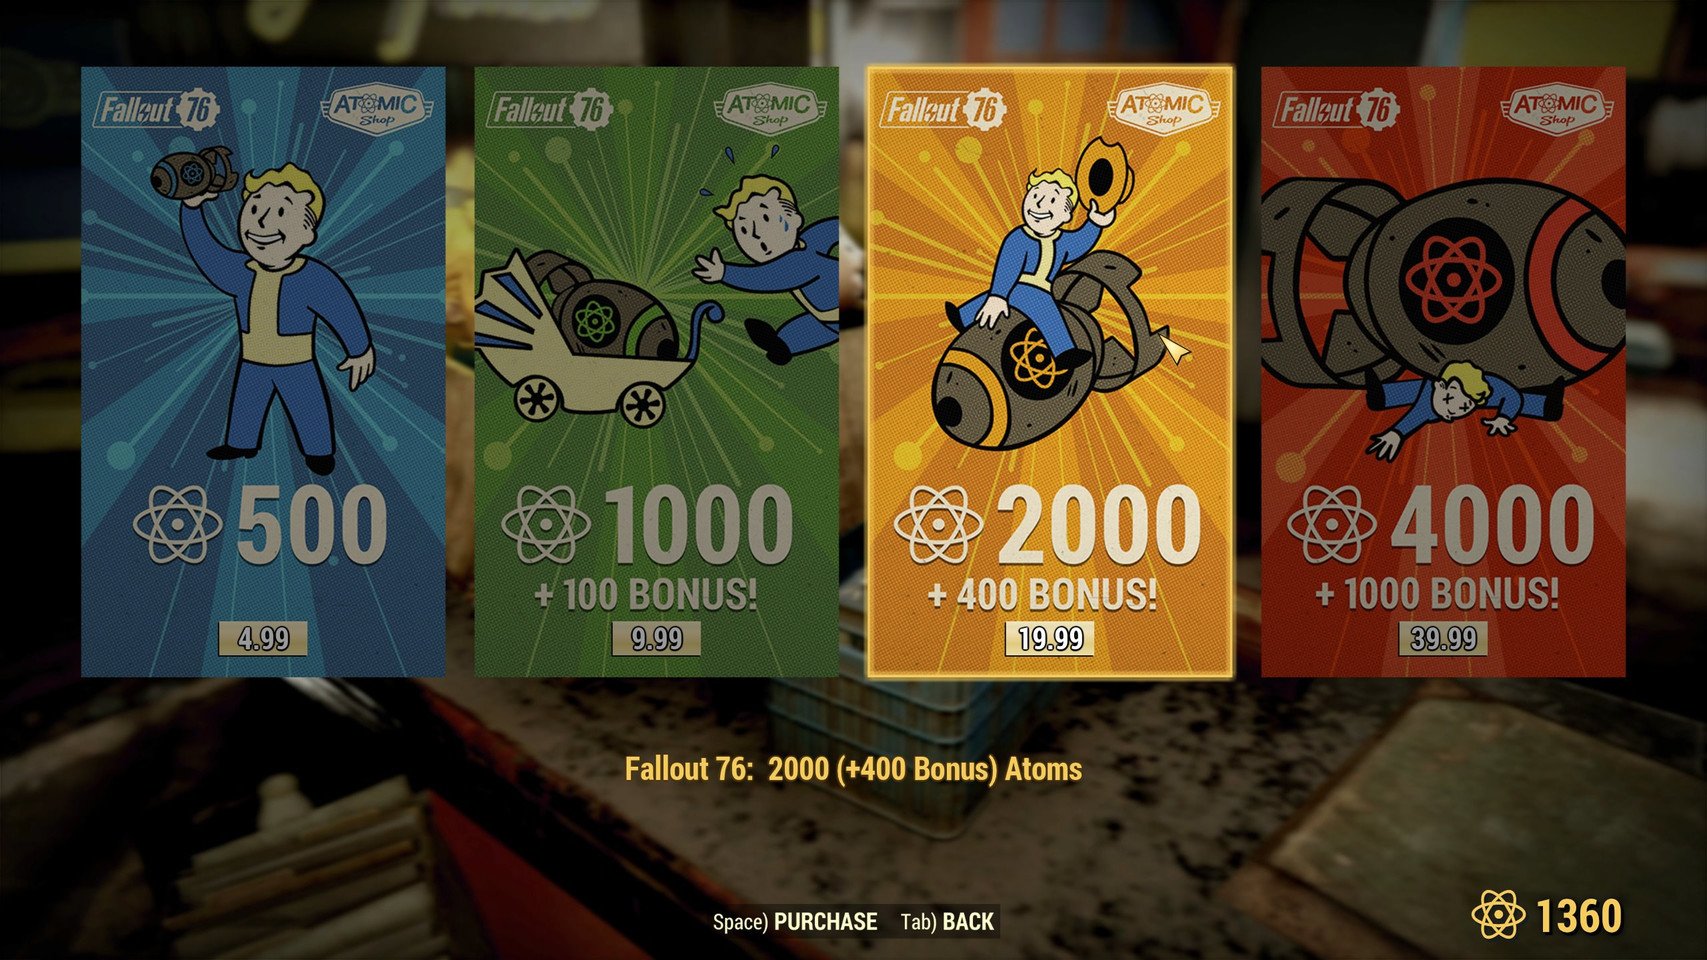 Fallout 76 Atom Shop Prices Reach New Level of Absurdity TechPowerUp